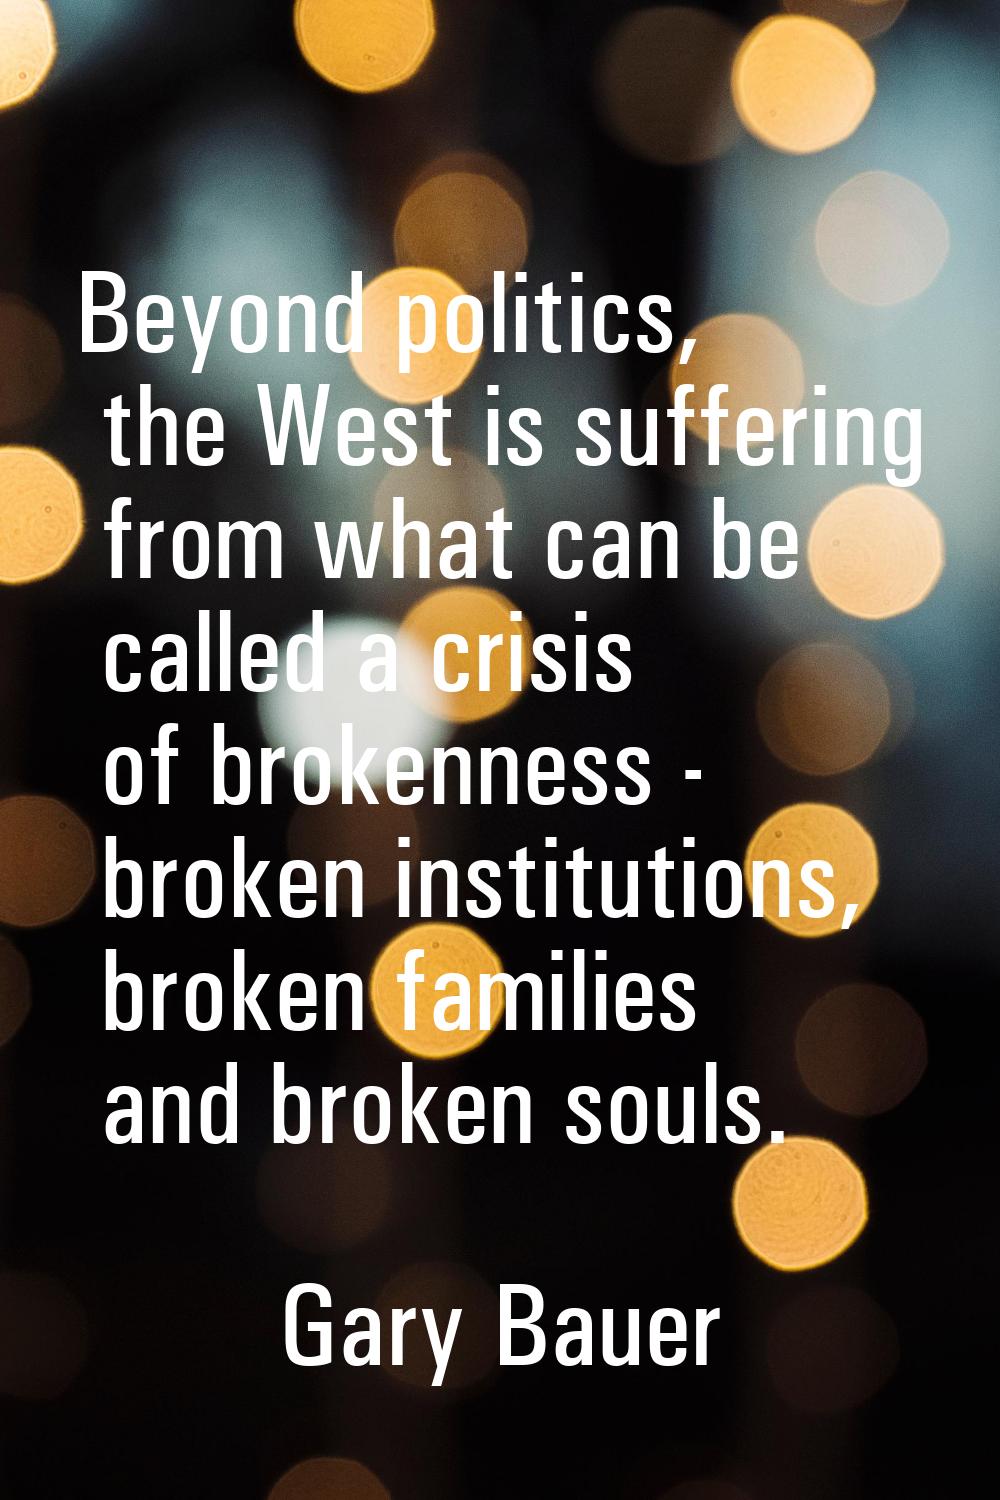 Beyond politics, the West is suffering from what can be called a crisis of brokenness - broken inst